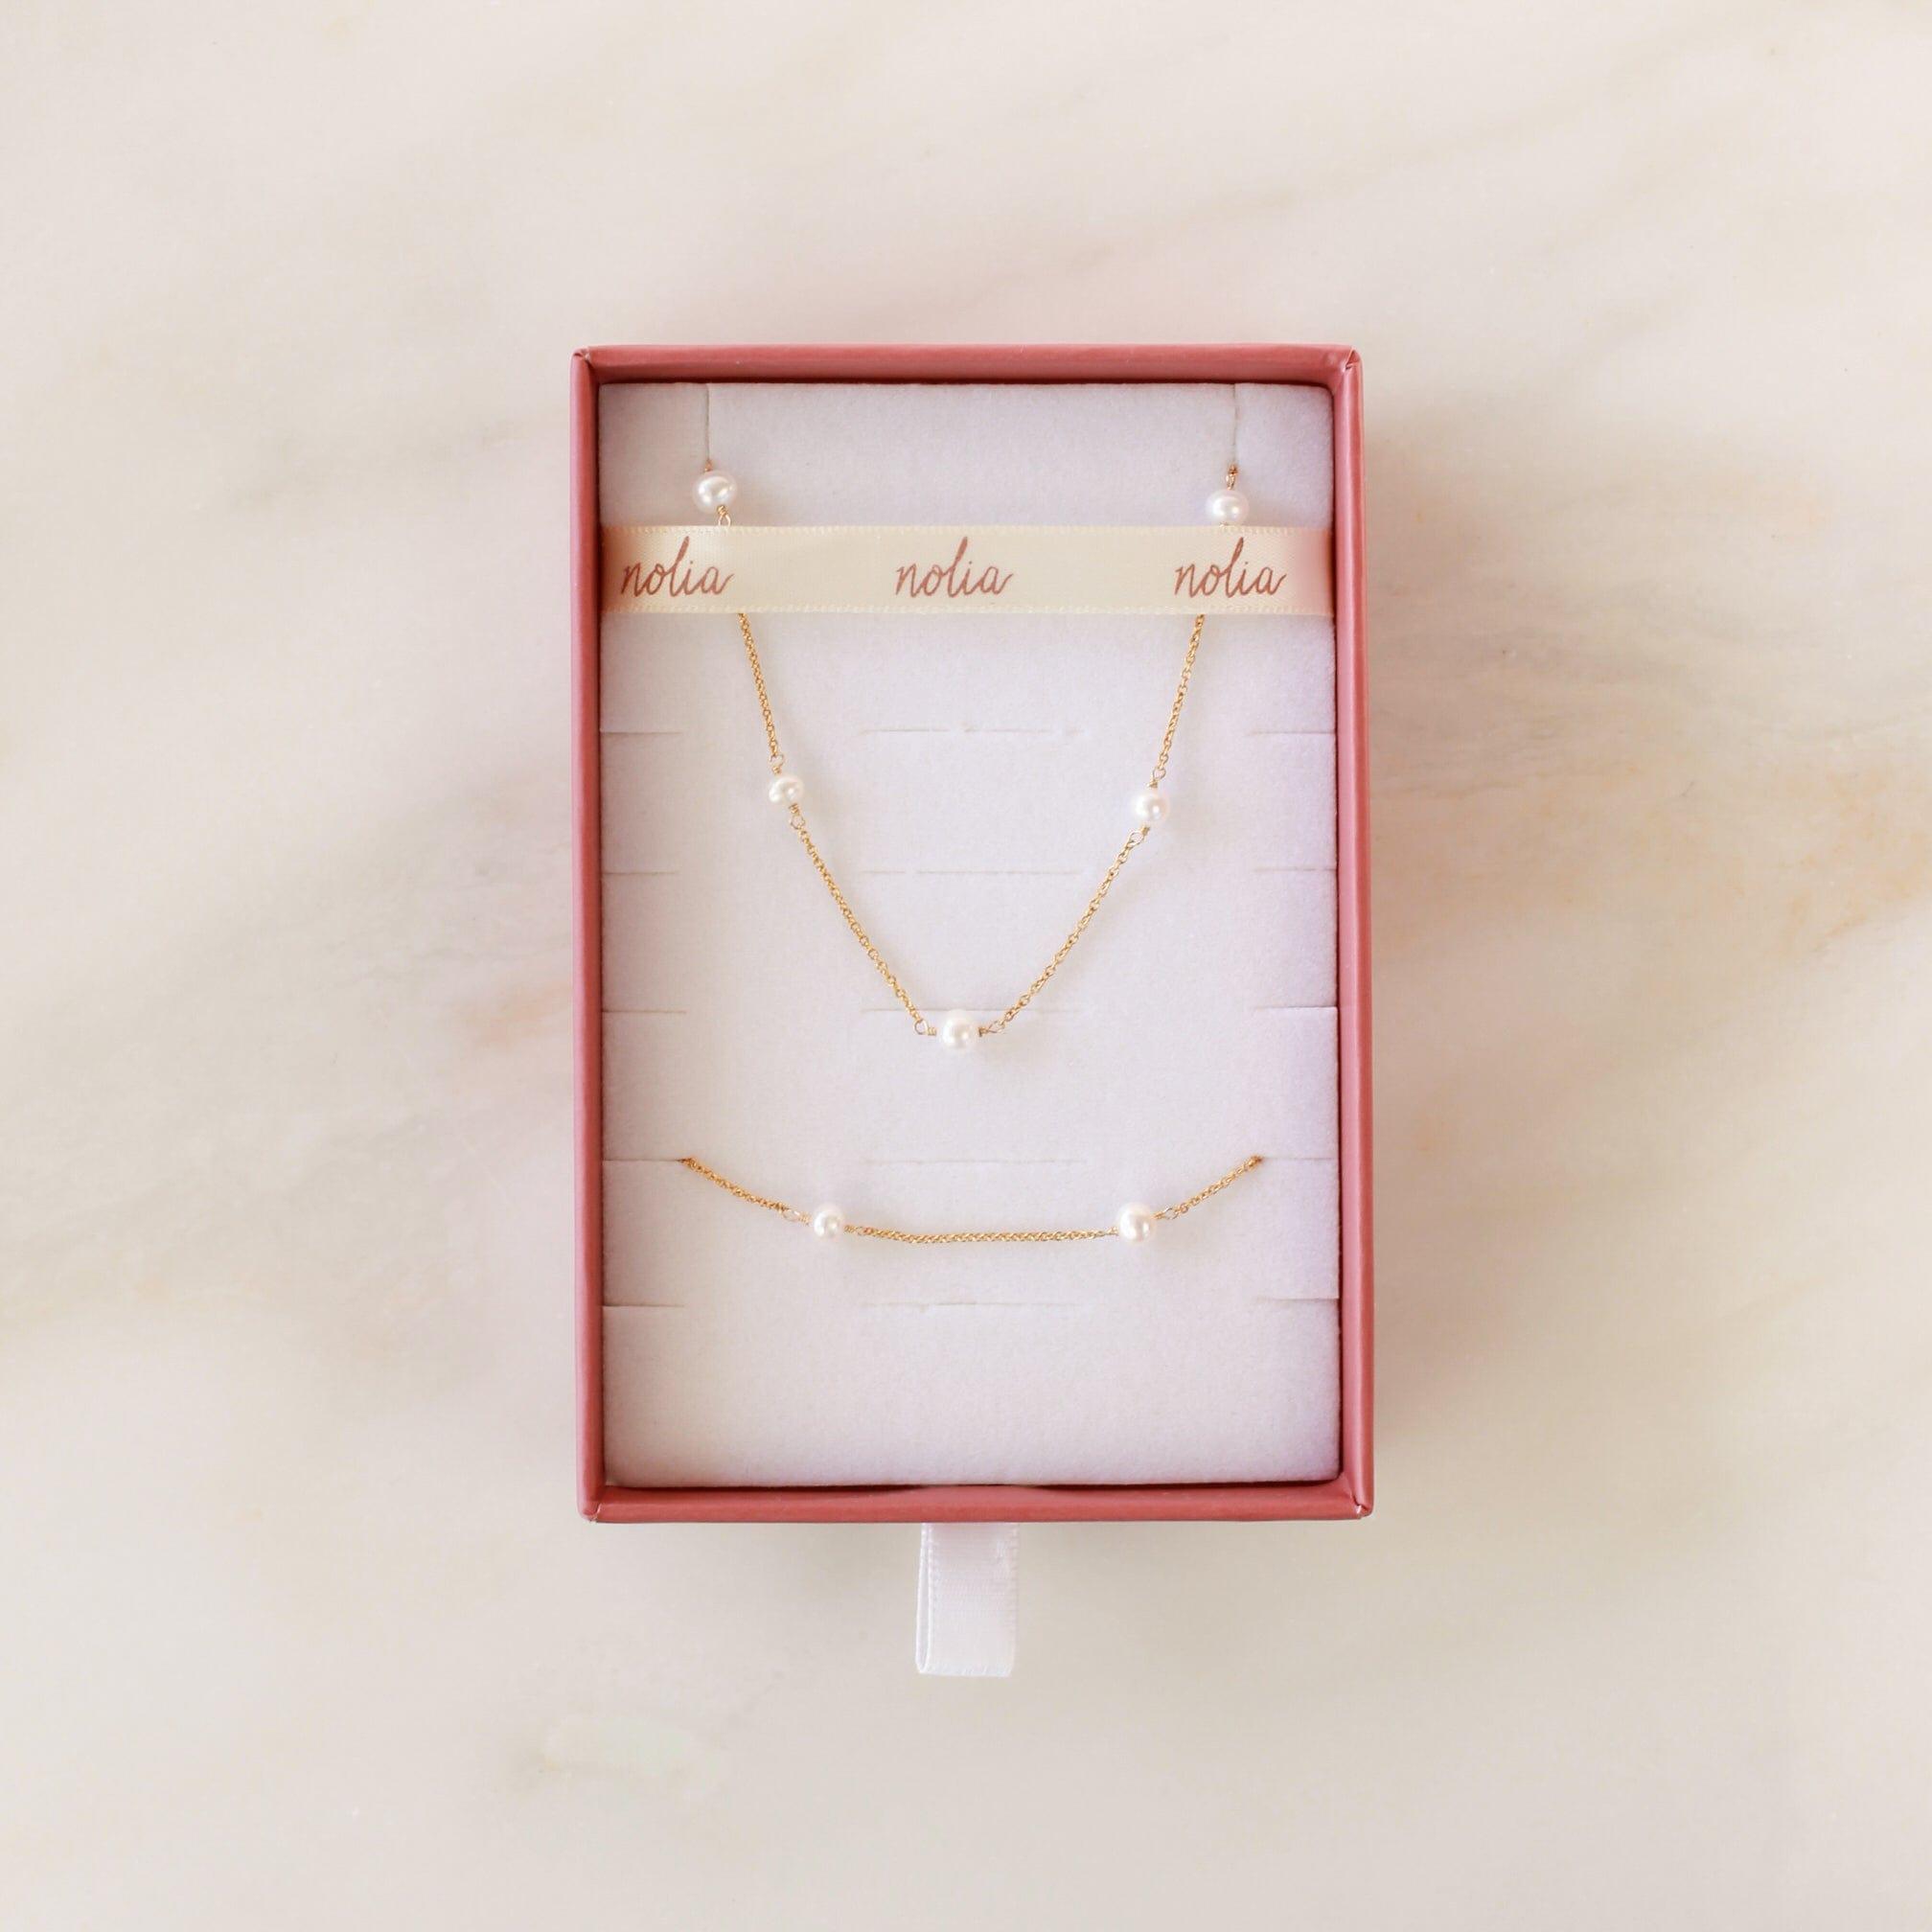 Marie Pearl Chain Gift Set - Nolia Jewelry - Meaningful + Sustainably Handcrafted Jewelry